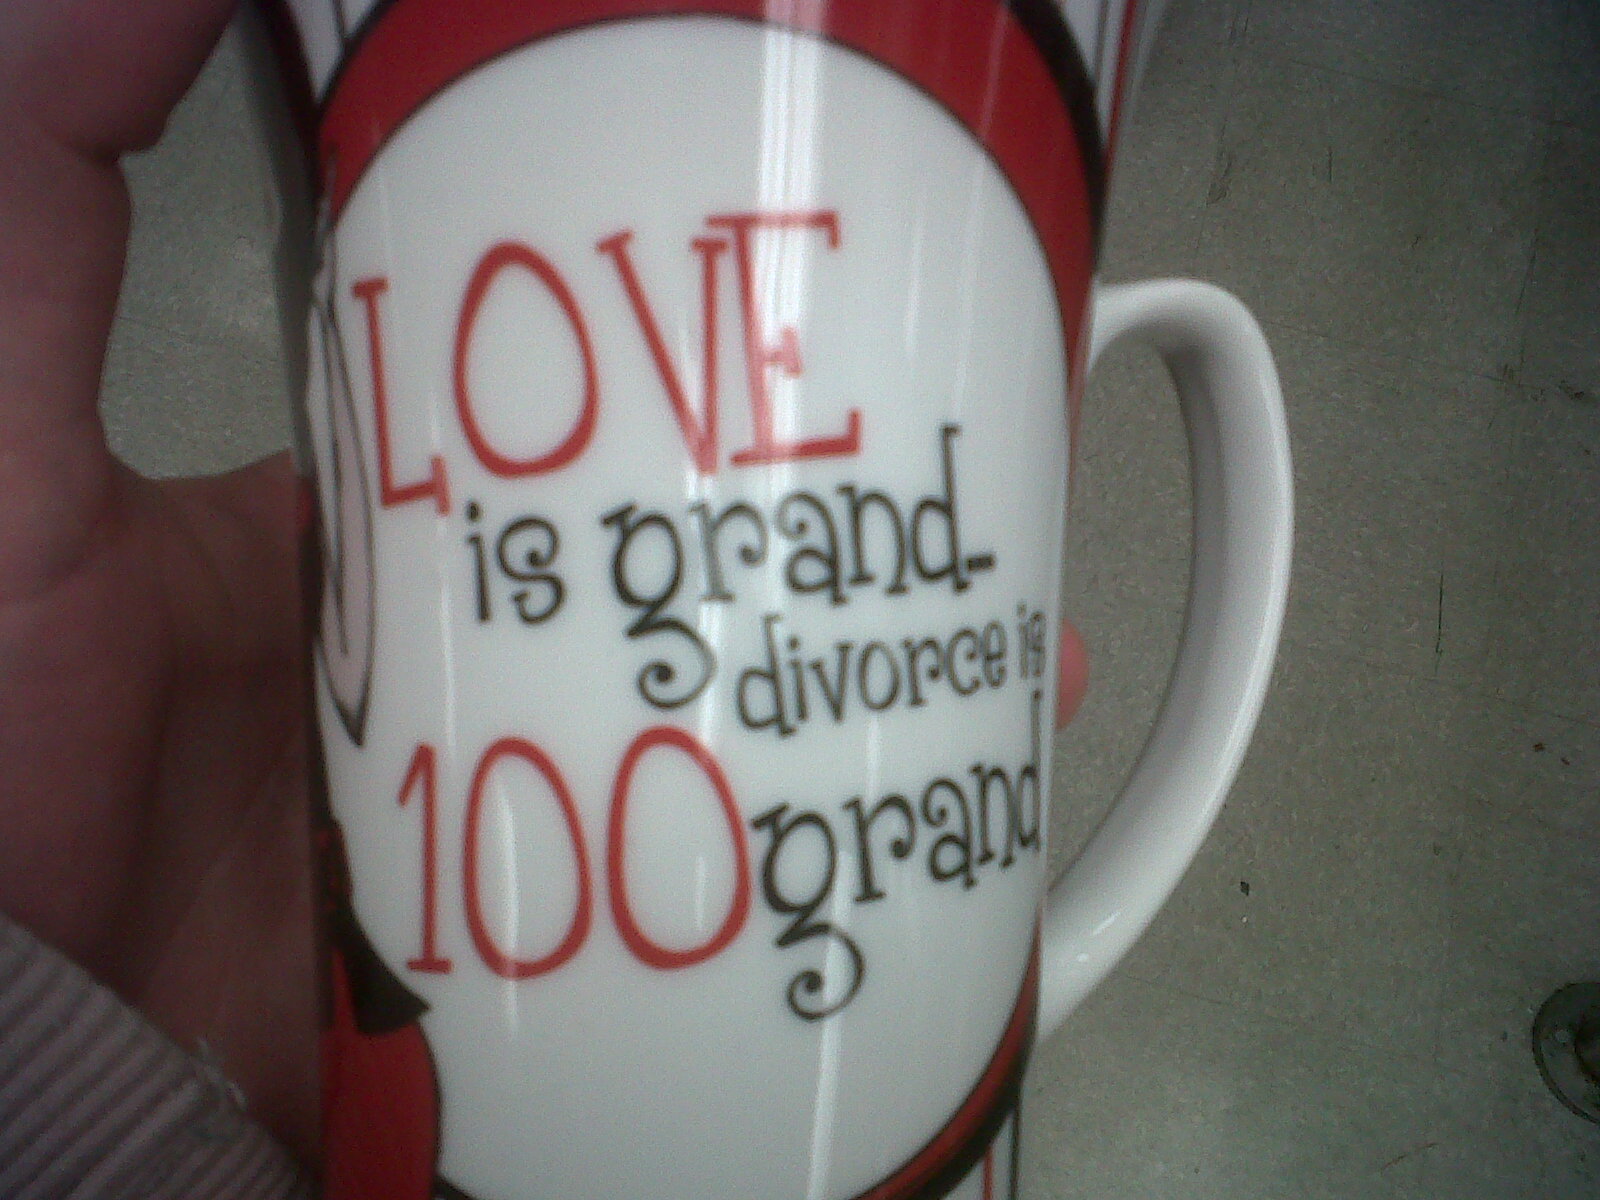 Love is grand...divorce is 100 grand...ain't that the truth...